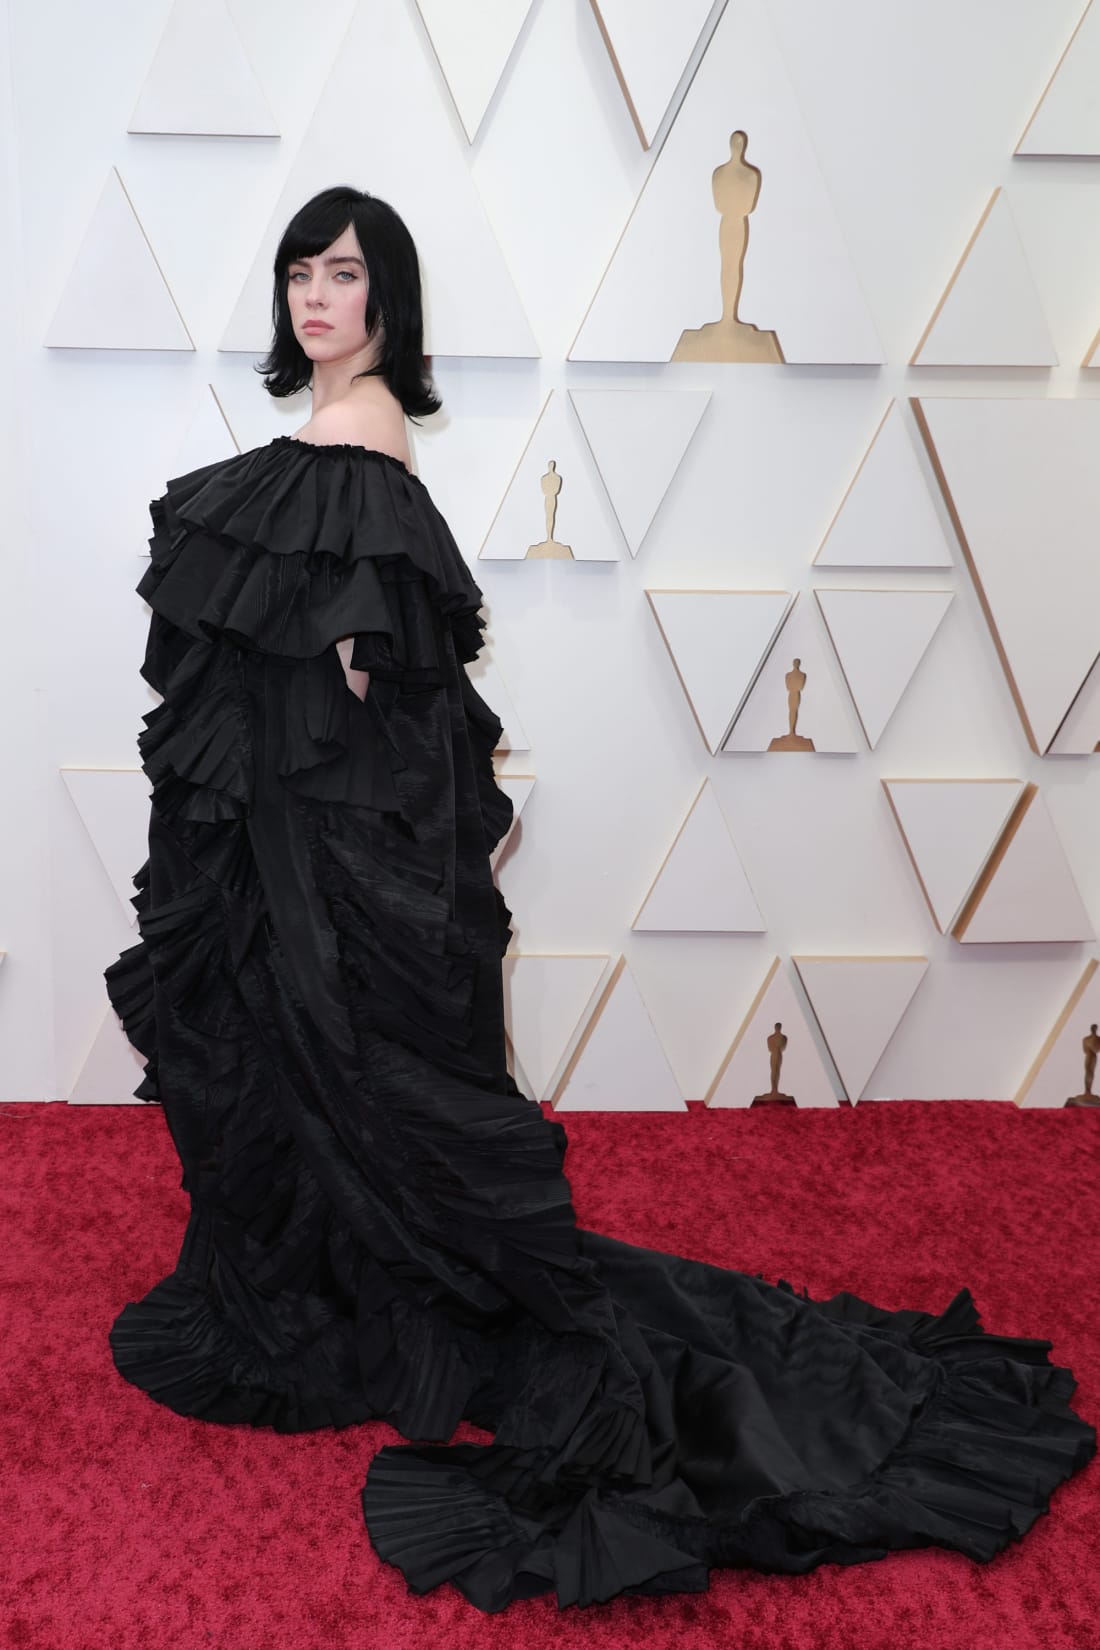 Billie Eilish donned a black tiered Gucci ballgown for the event.